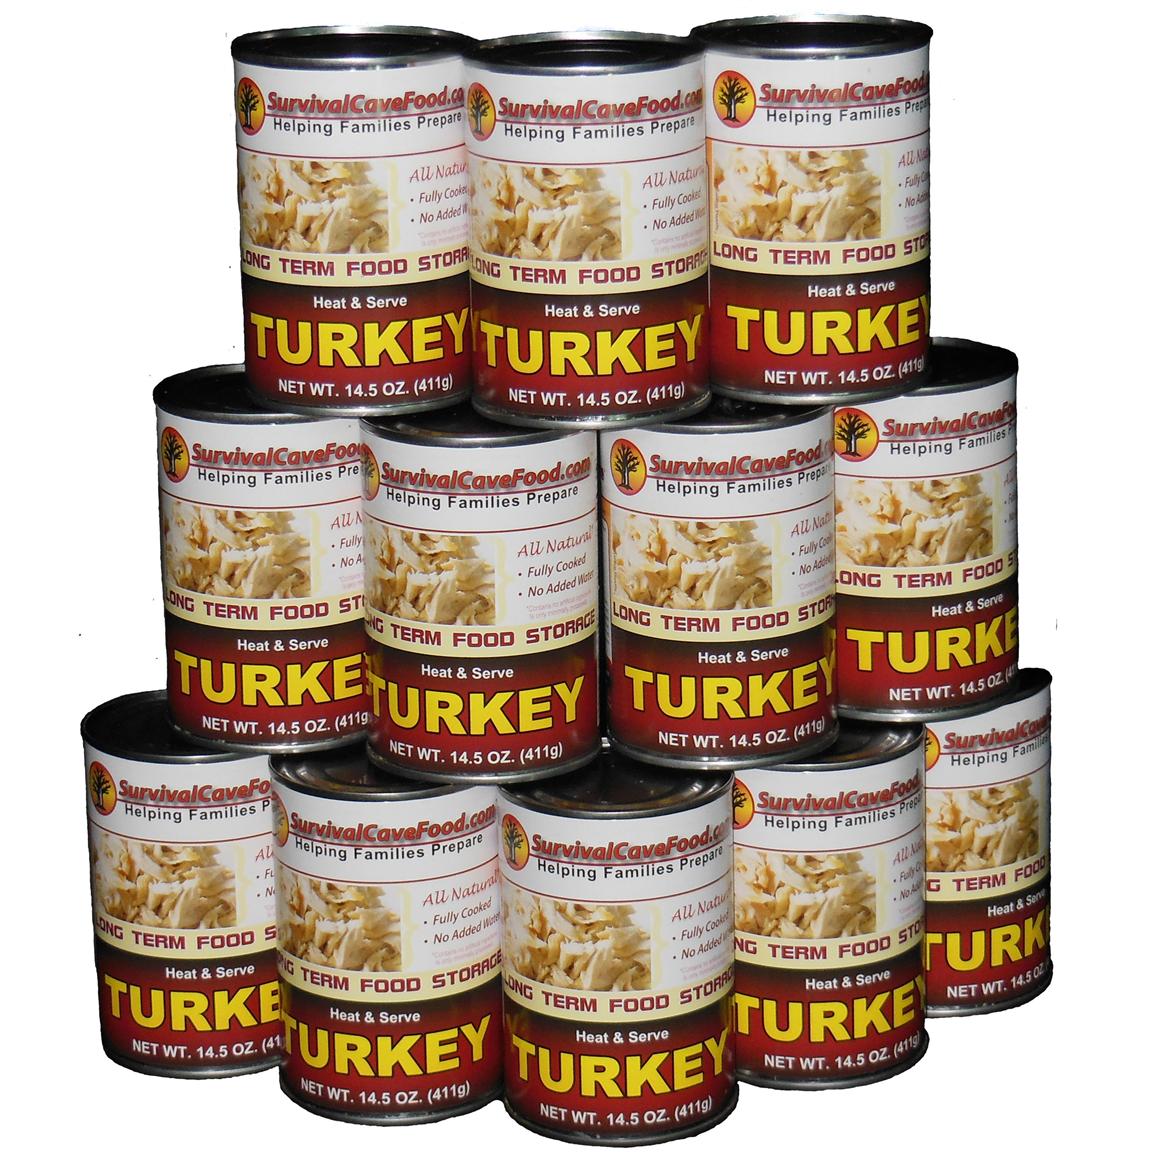 Survival Cave Food Canned Turkey, 12 Pack, 14.5-oz. Cans